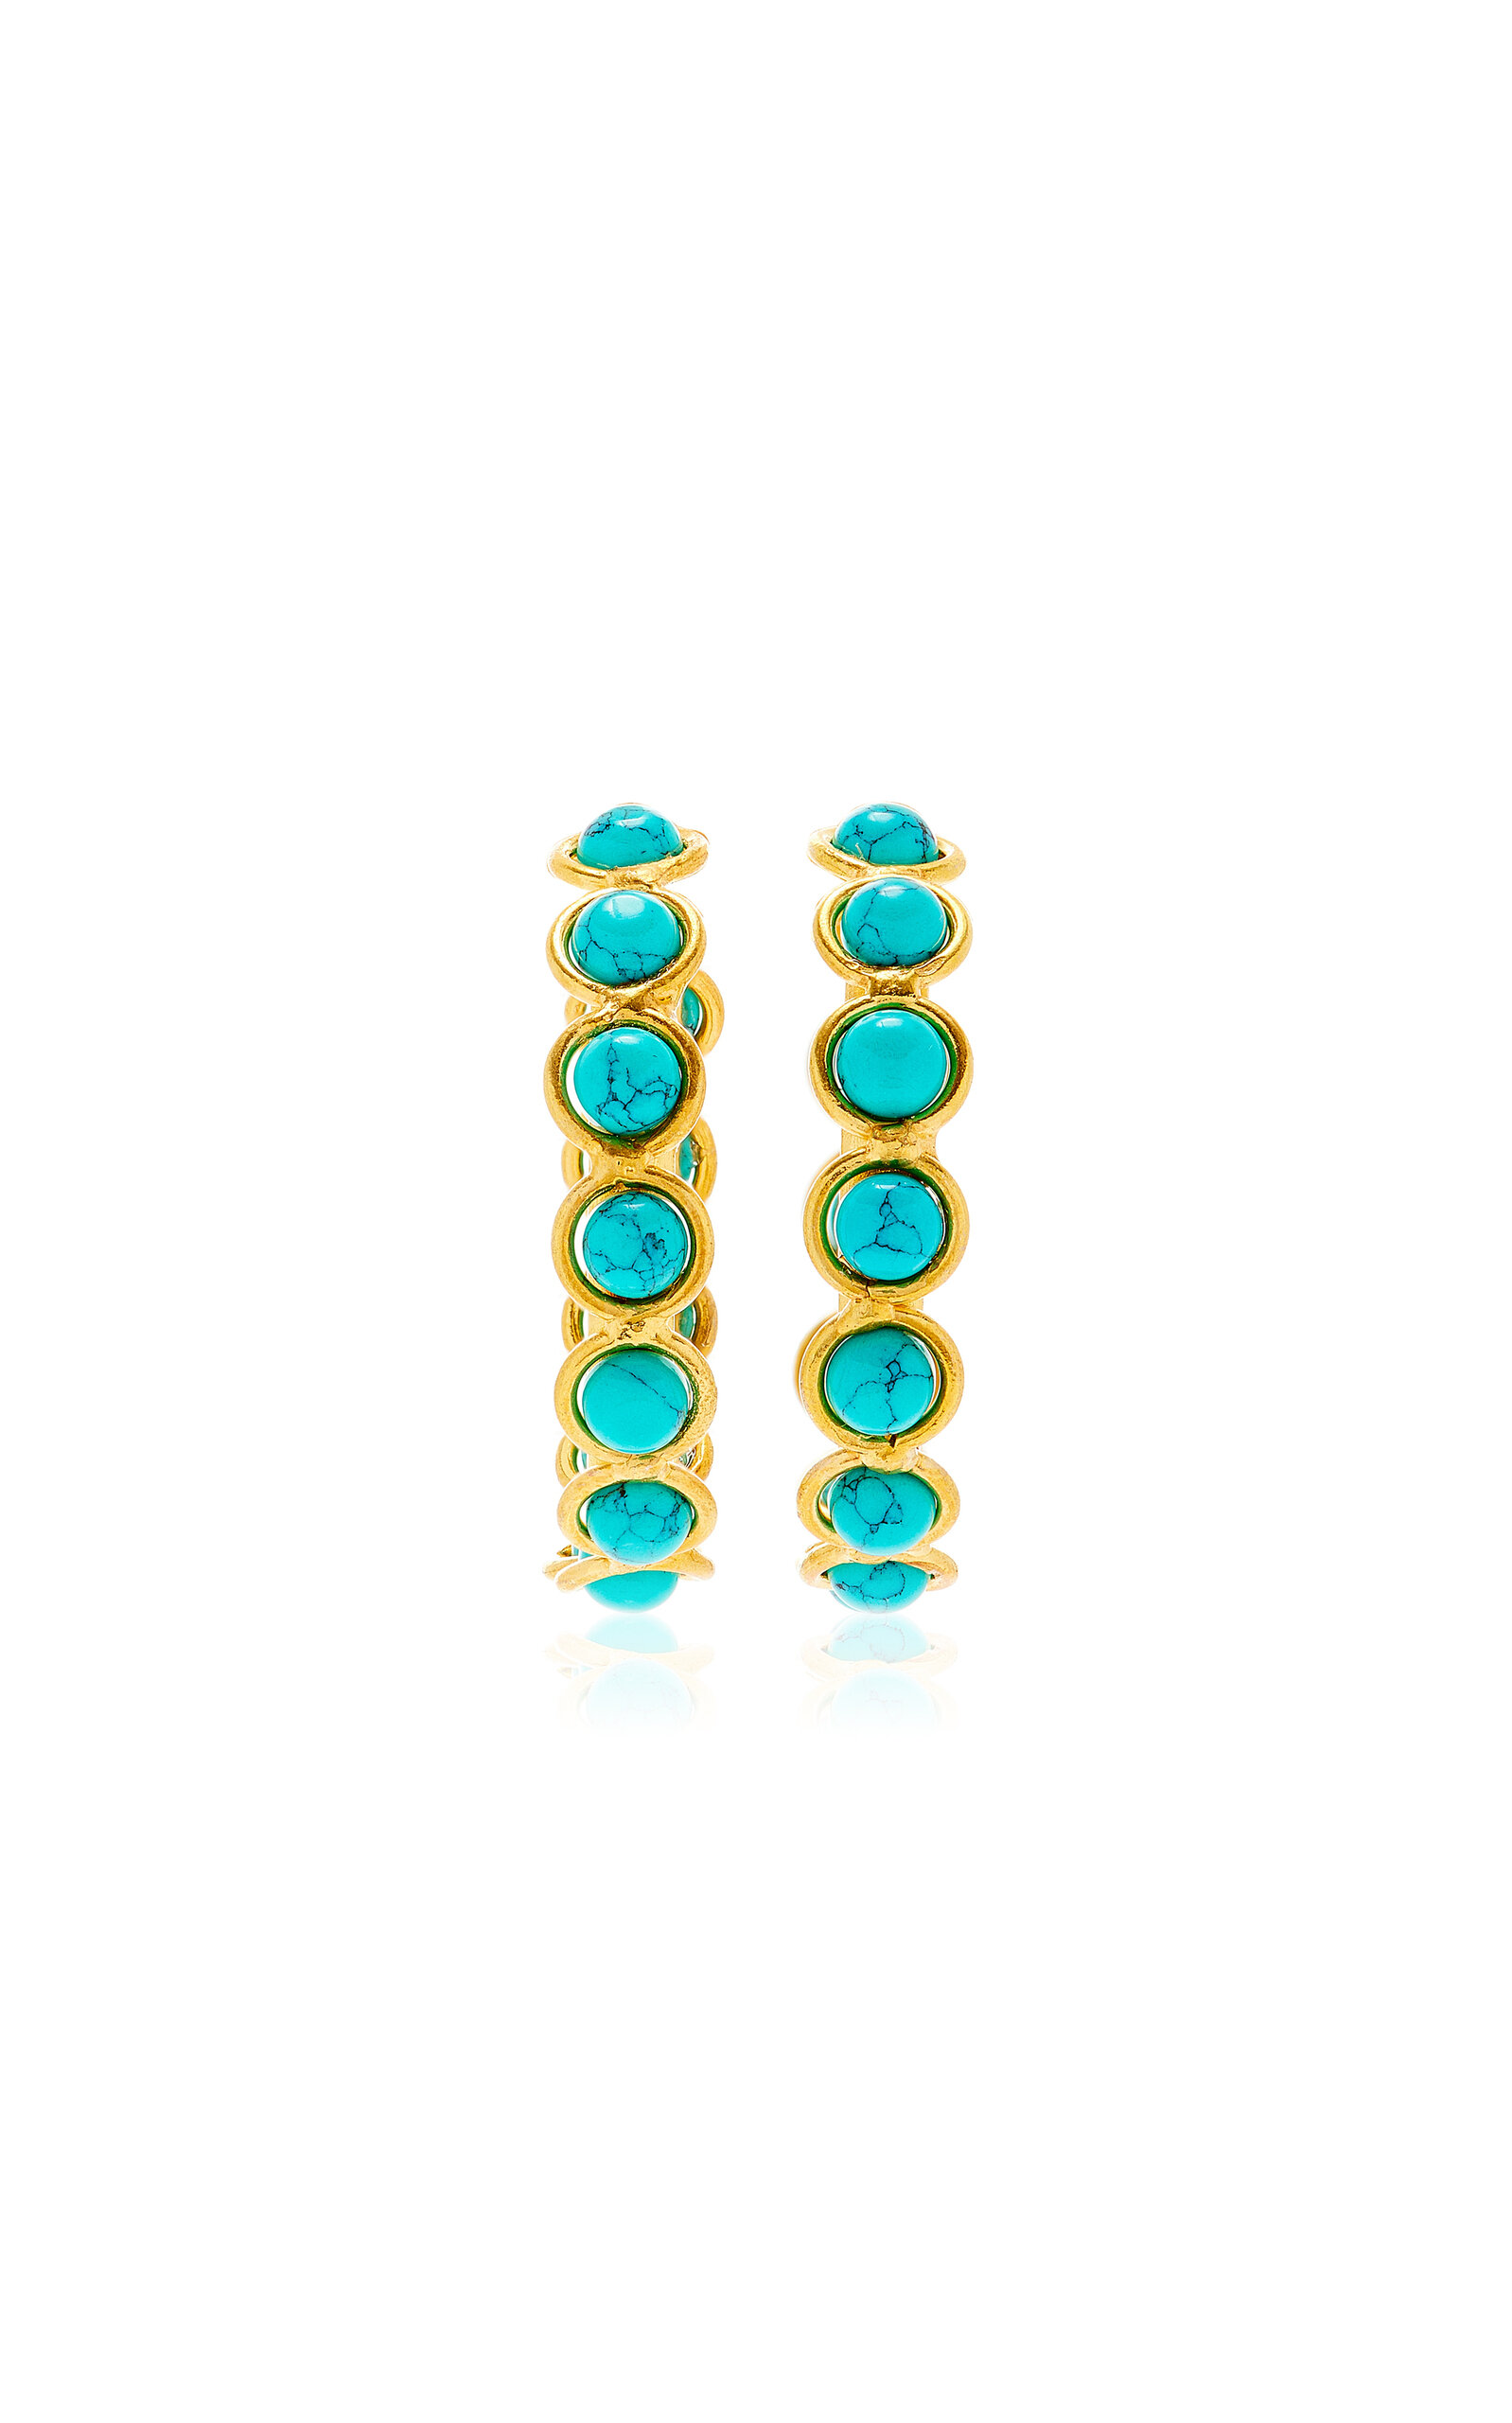 Sylvia Toledano Candies 22k Gold-plated Turquoise Earrings In Blue